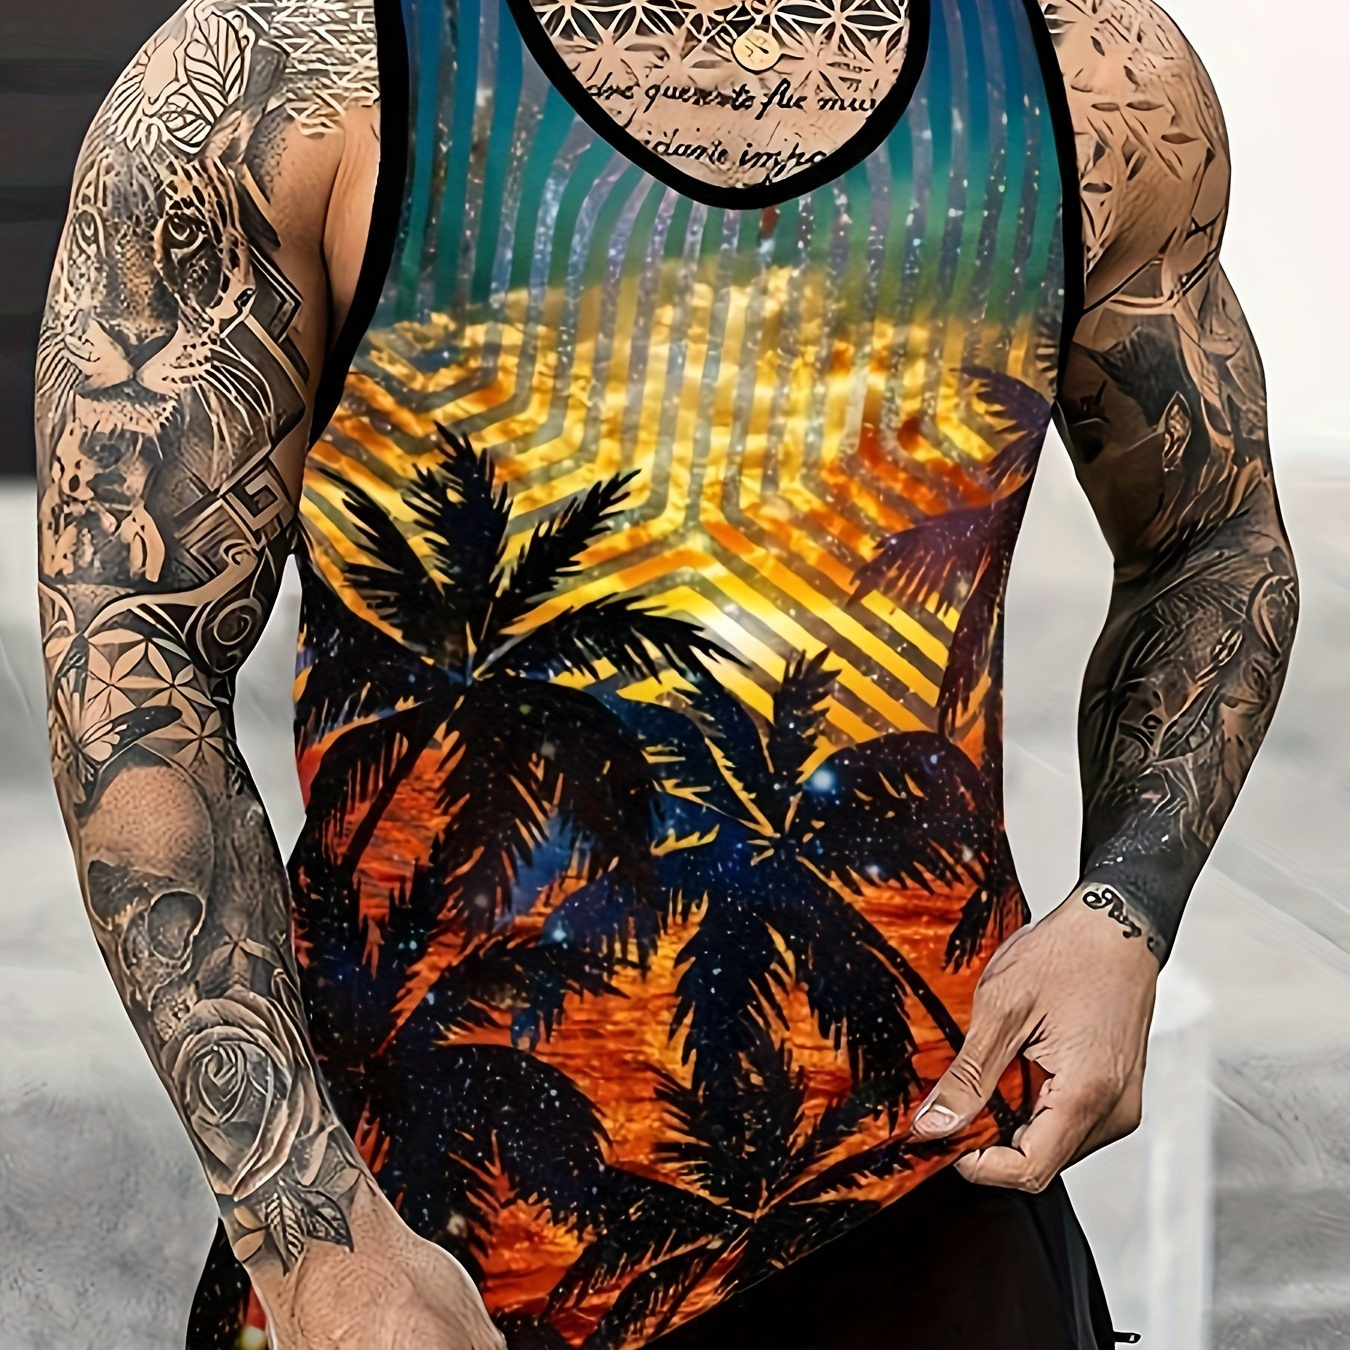 

Men's Trendy Crew Neck Graphic Tank Top With Fancy Tropical Palm Tree Print, Vacation Style For Summer Wear